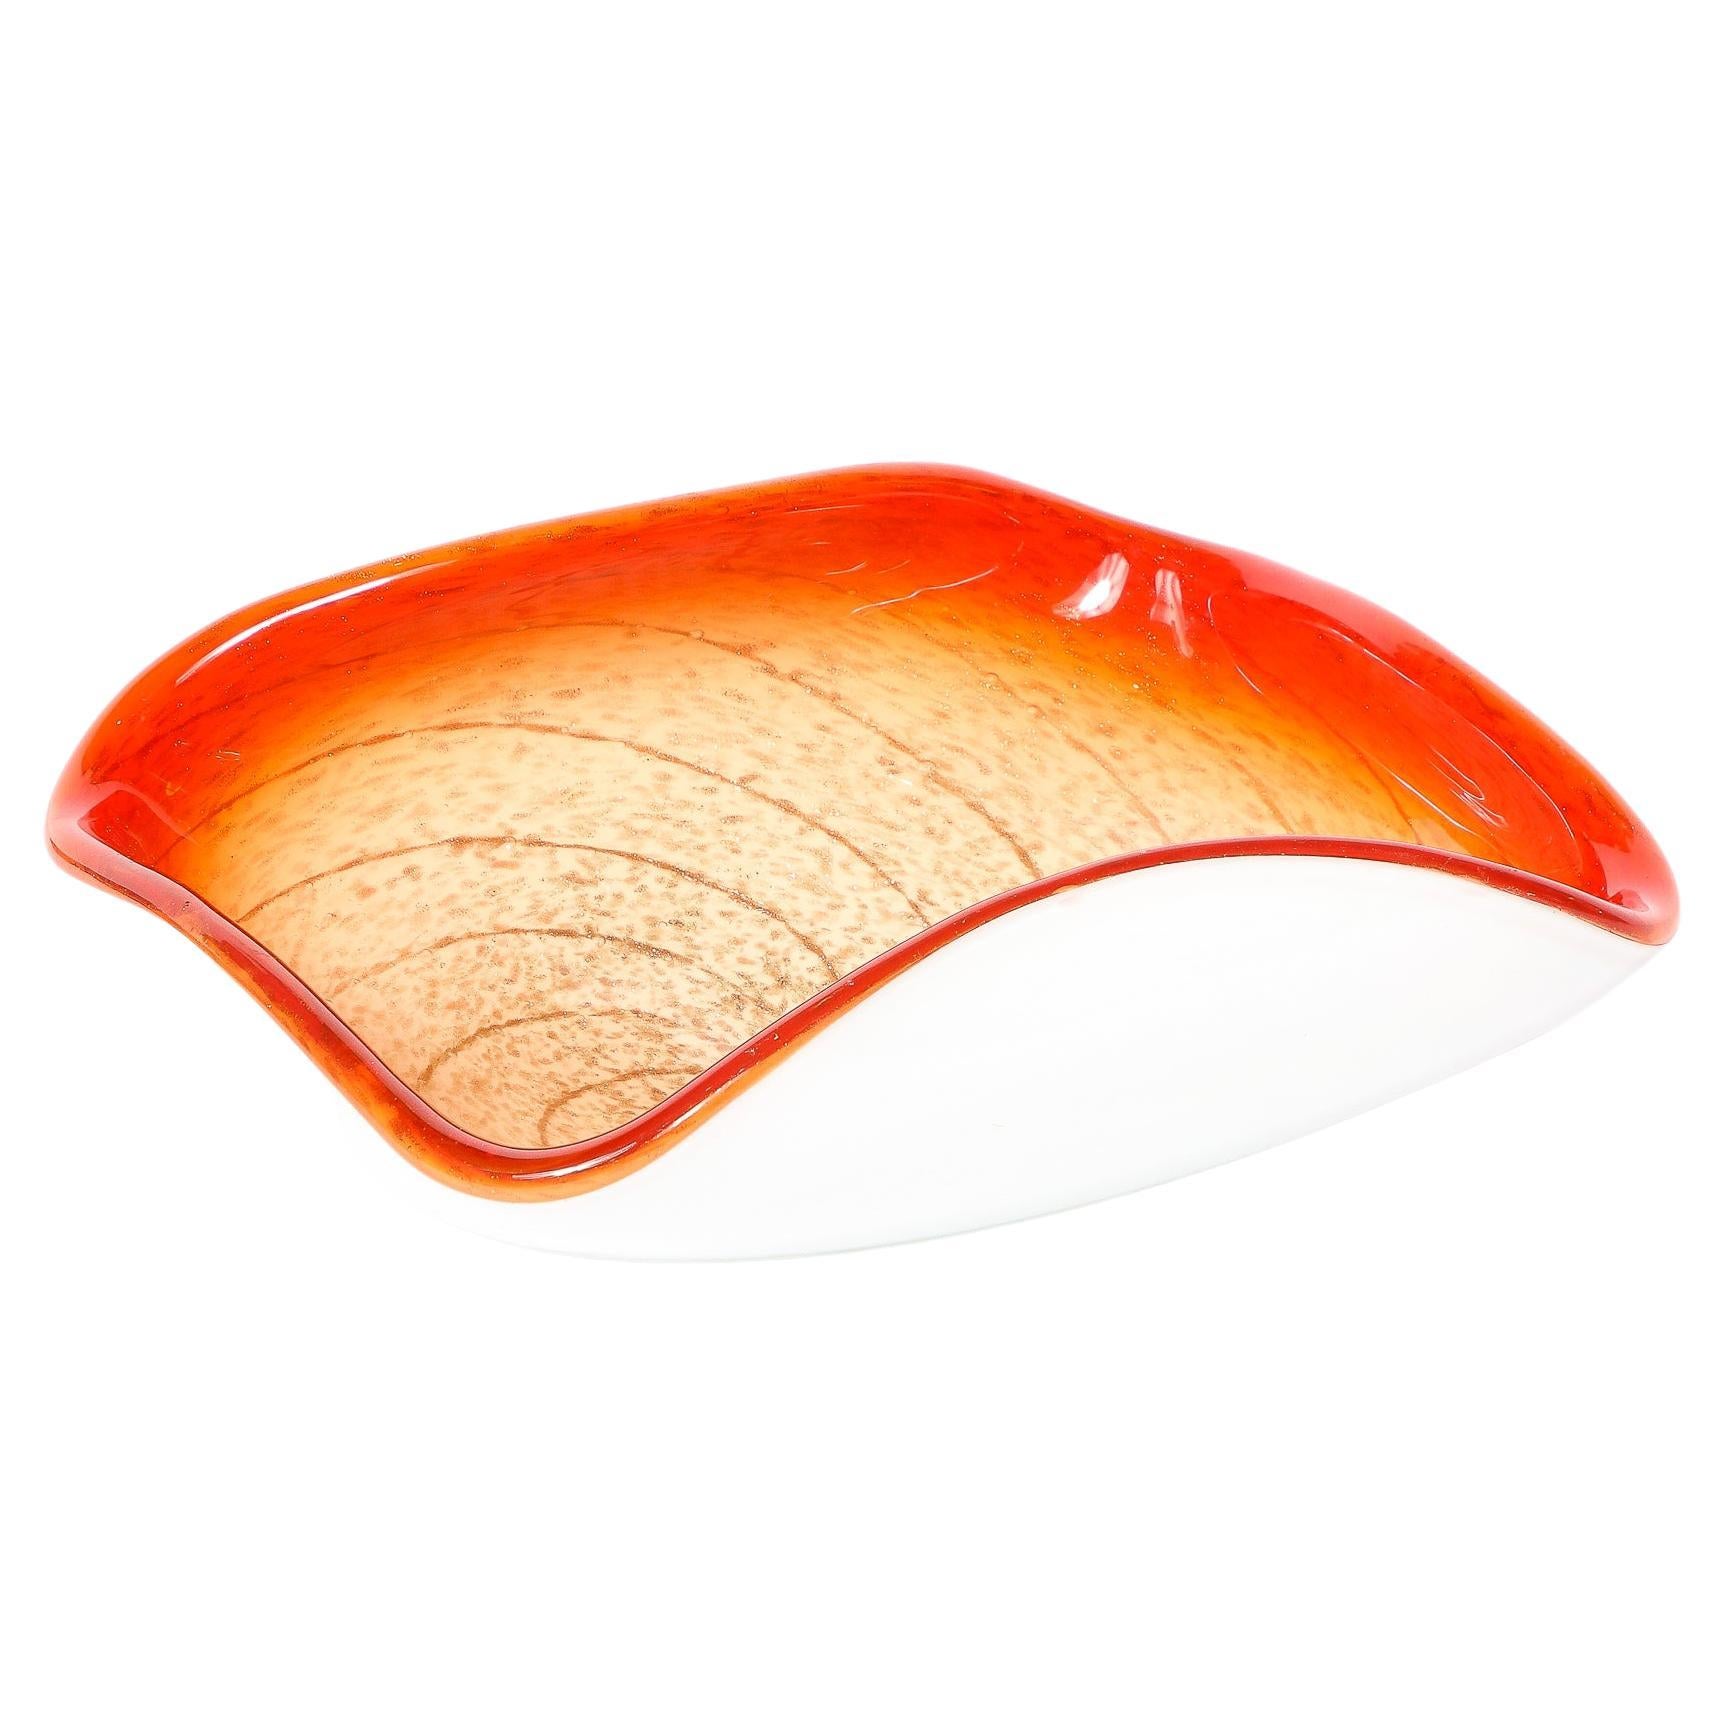 -This vibrant Mid-Century Modernist Hand-Blown Murano Glass dish originates from Italy, Circa 1960. In a rounded square shape with a snow white undersurface curving up to form the space of the dish, the bright colors jump from the center. The edge